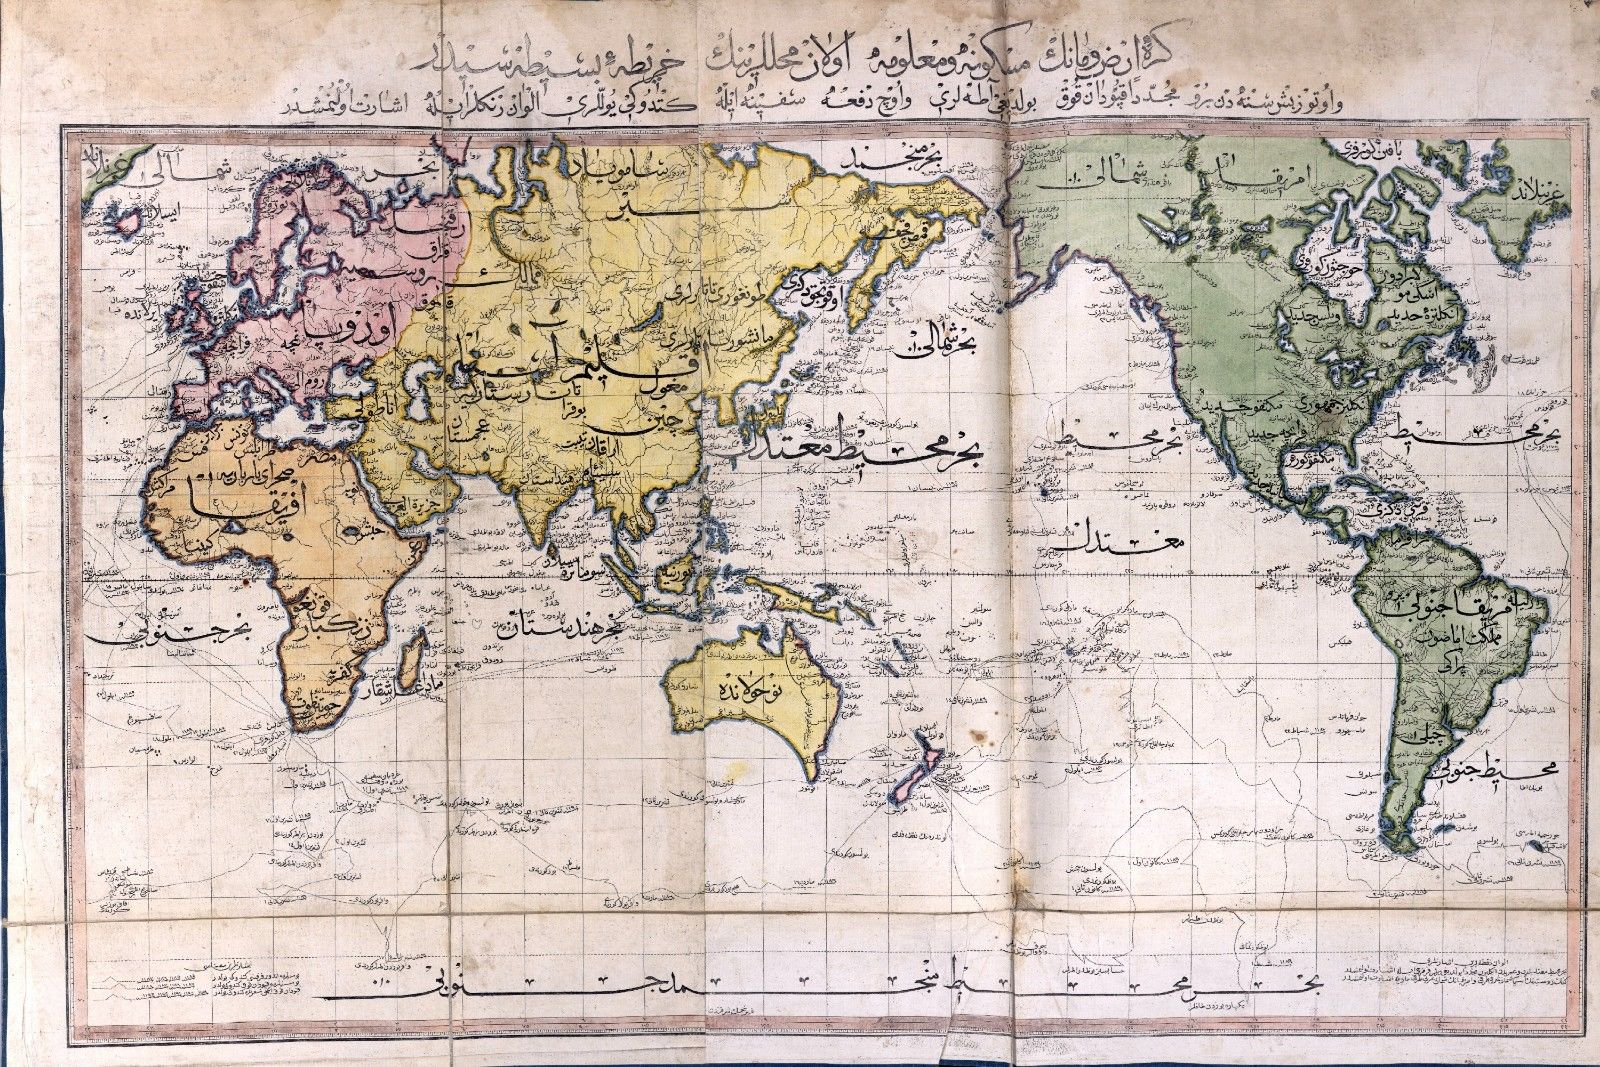 Remarkably accurate world map from the Ottoman Empire, published 1803